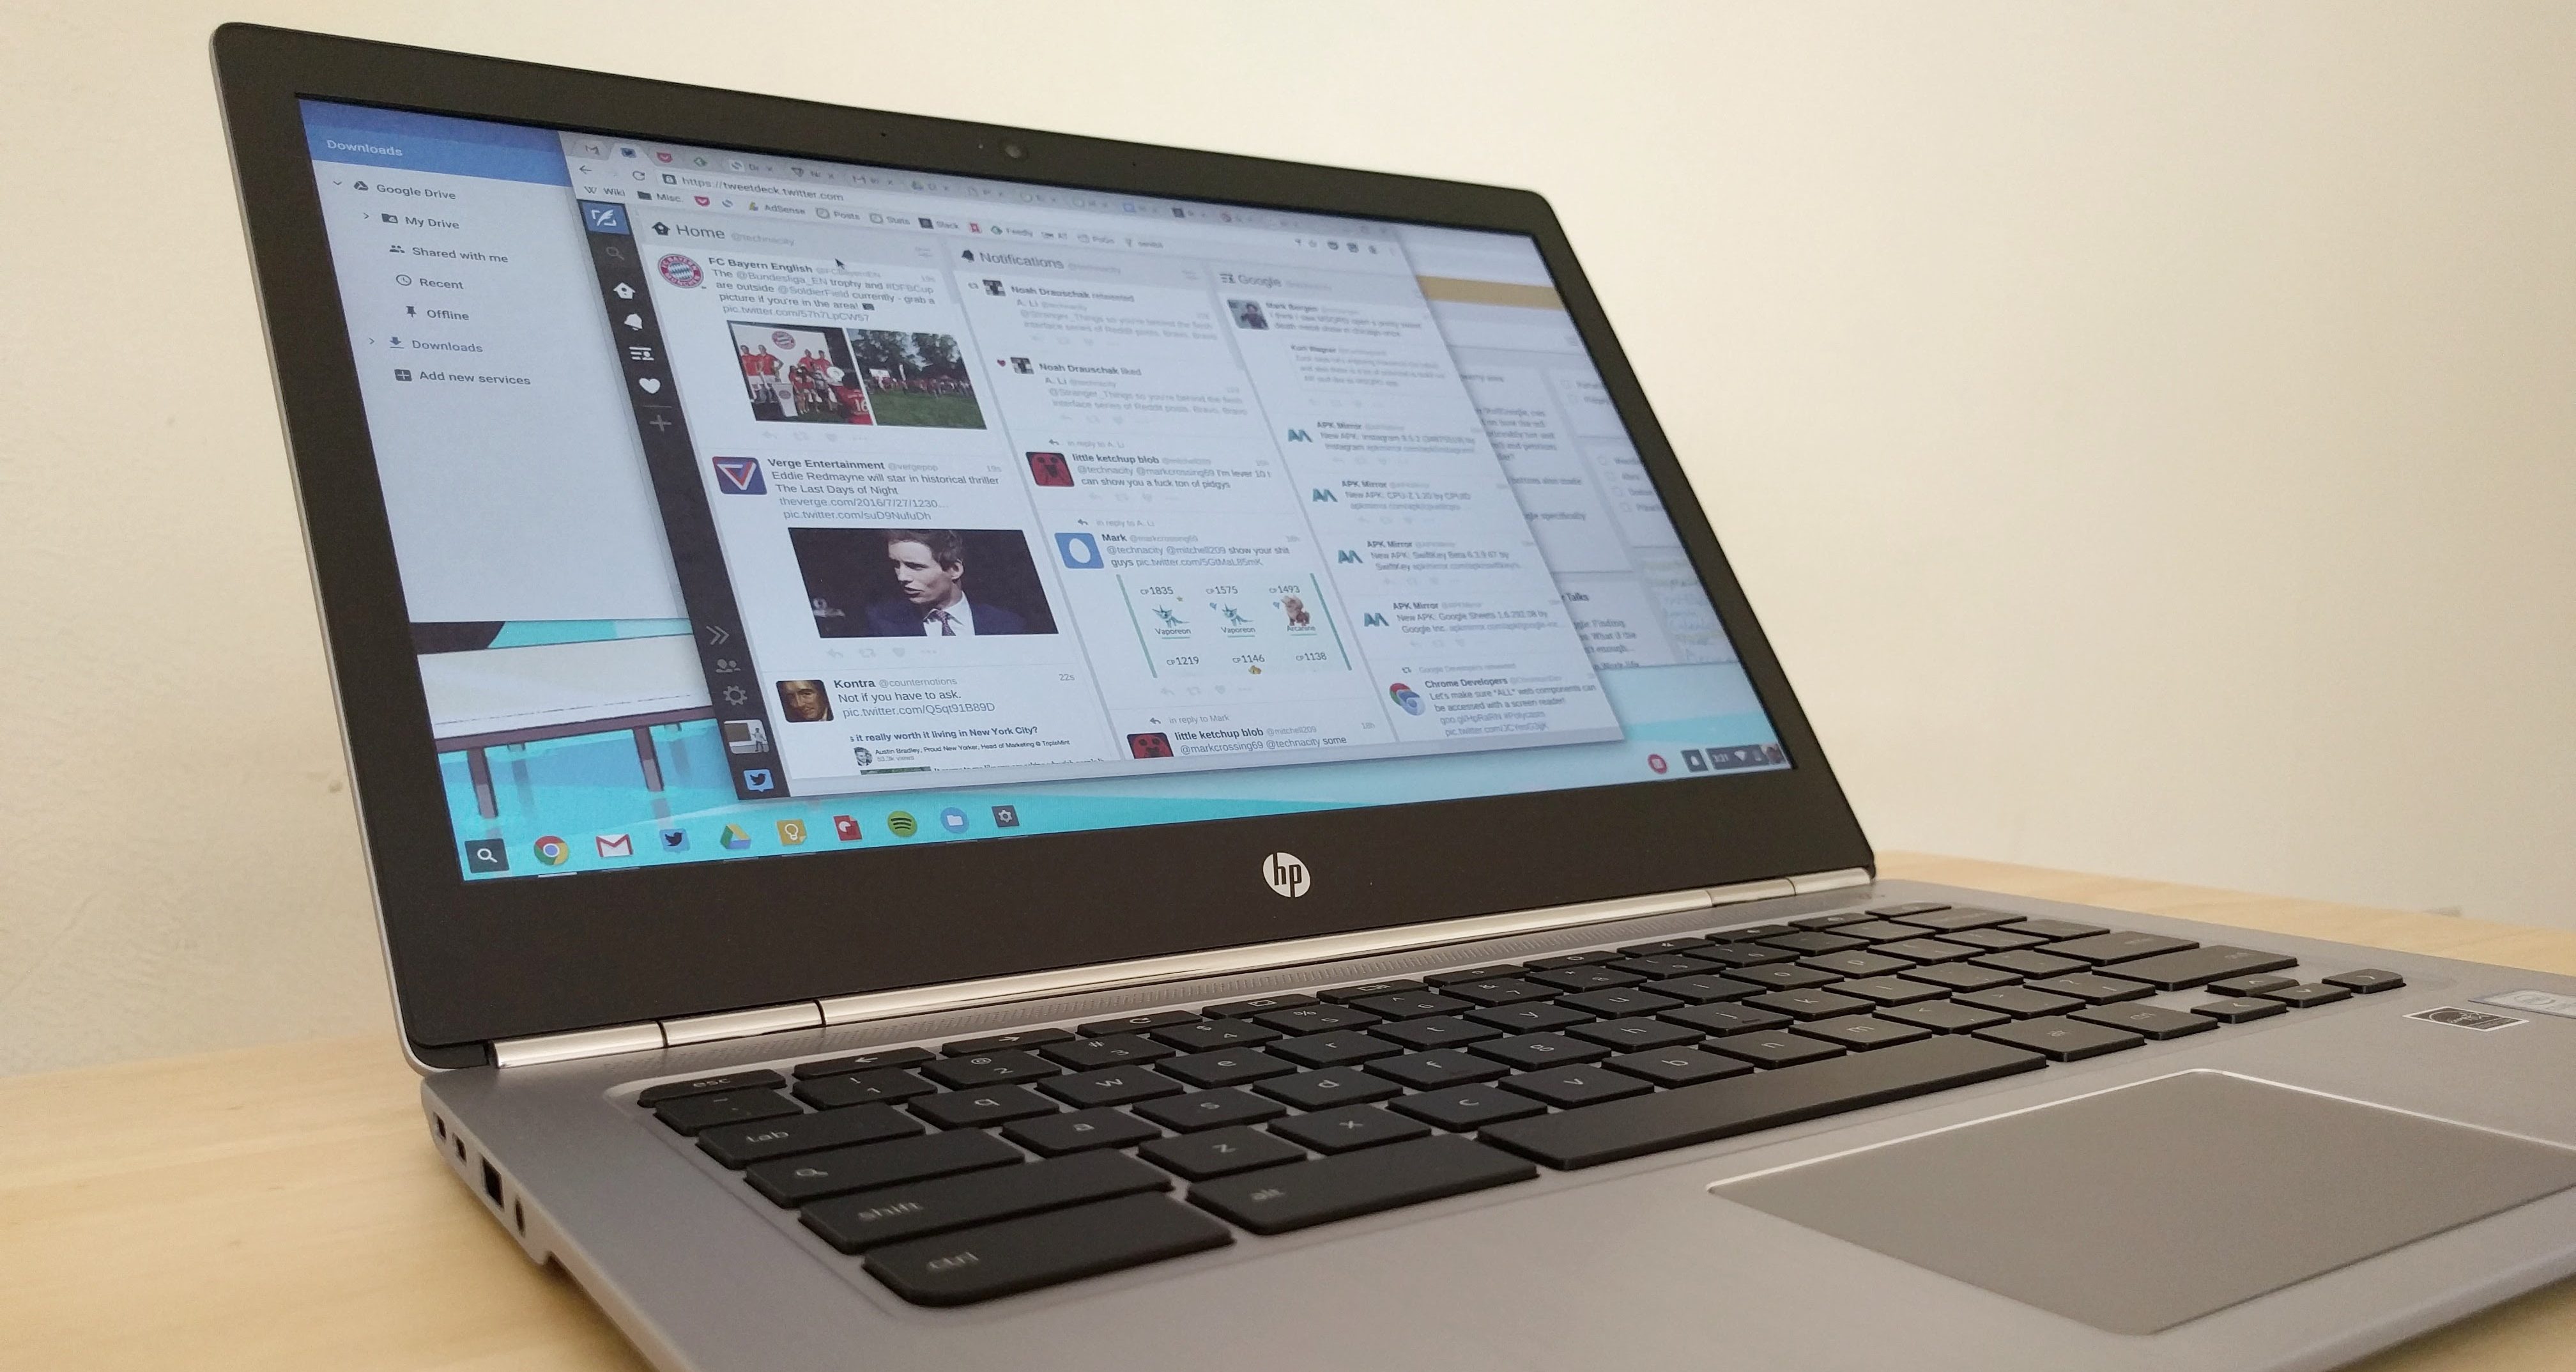 Review: HP Chromebook 13 is a Pixel-like Chrome OS laptop without